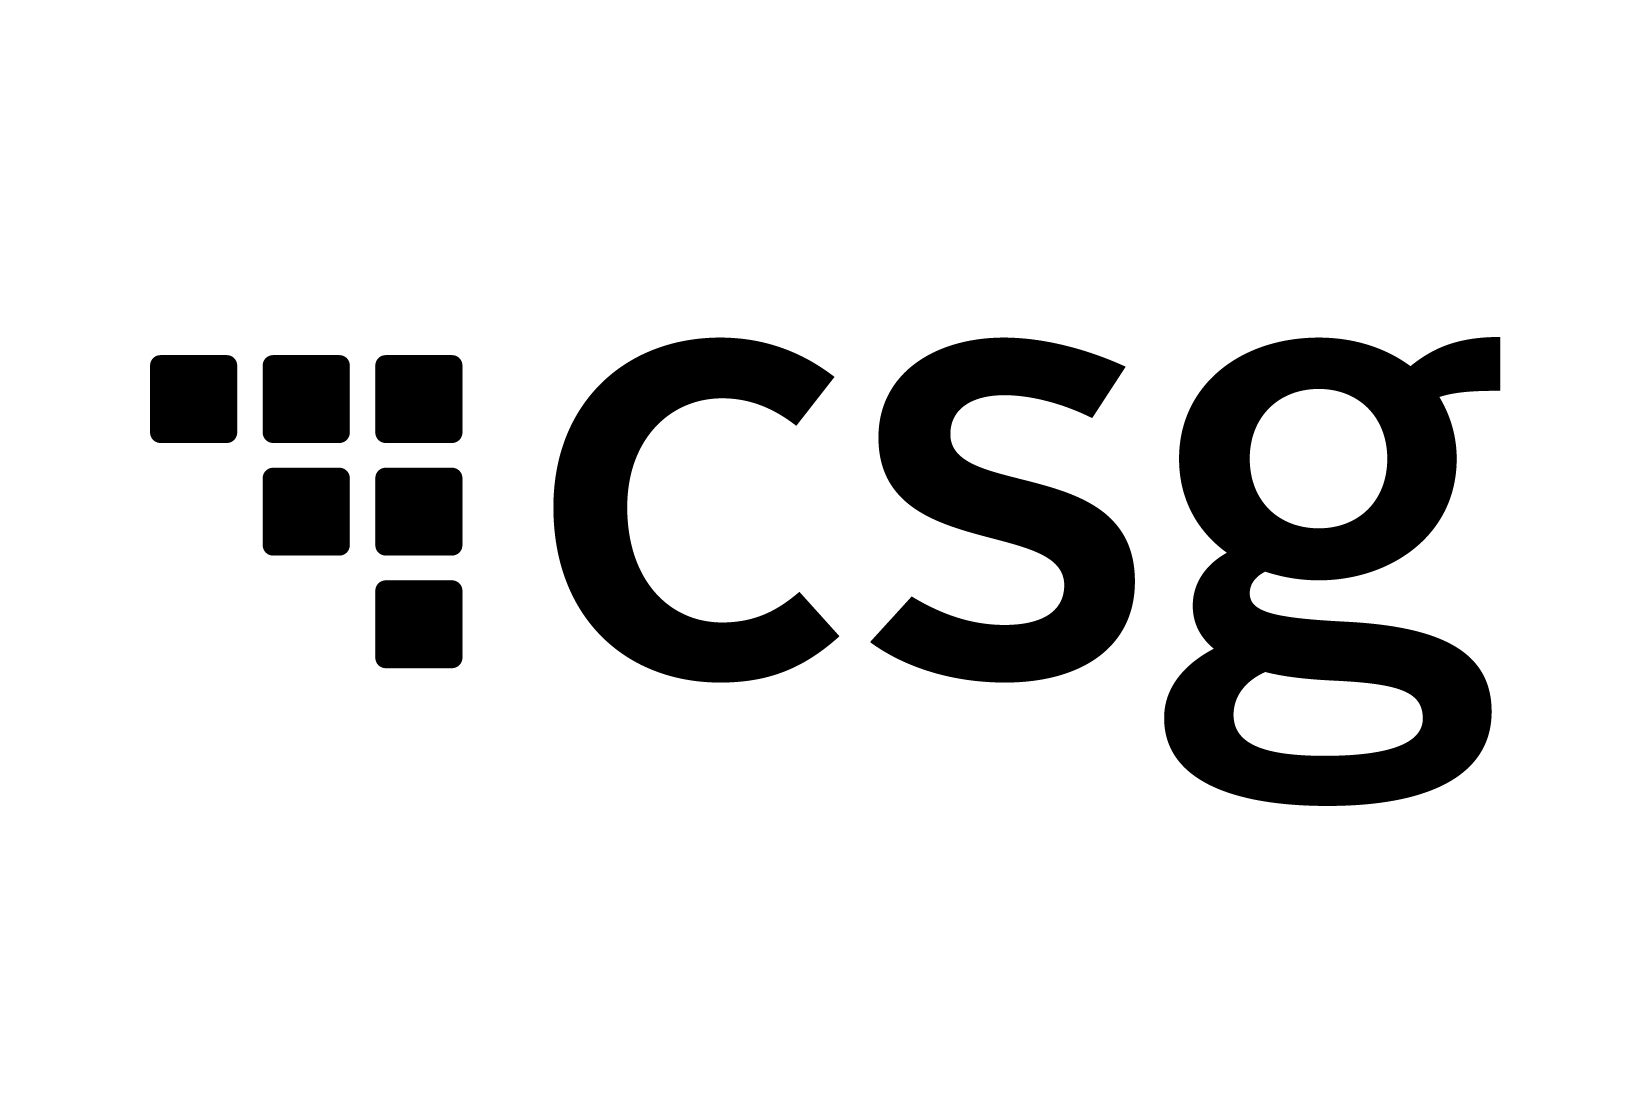 CSG - Customer Experience, Billing and Payments Solutions